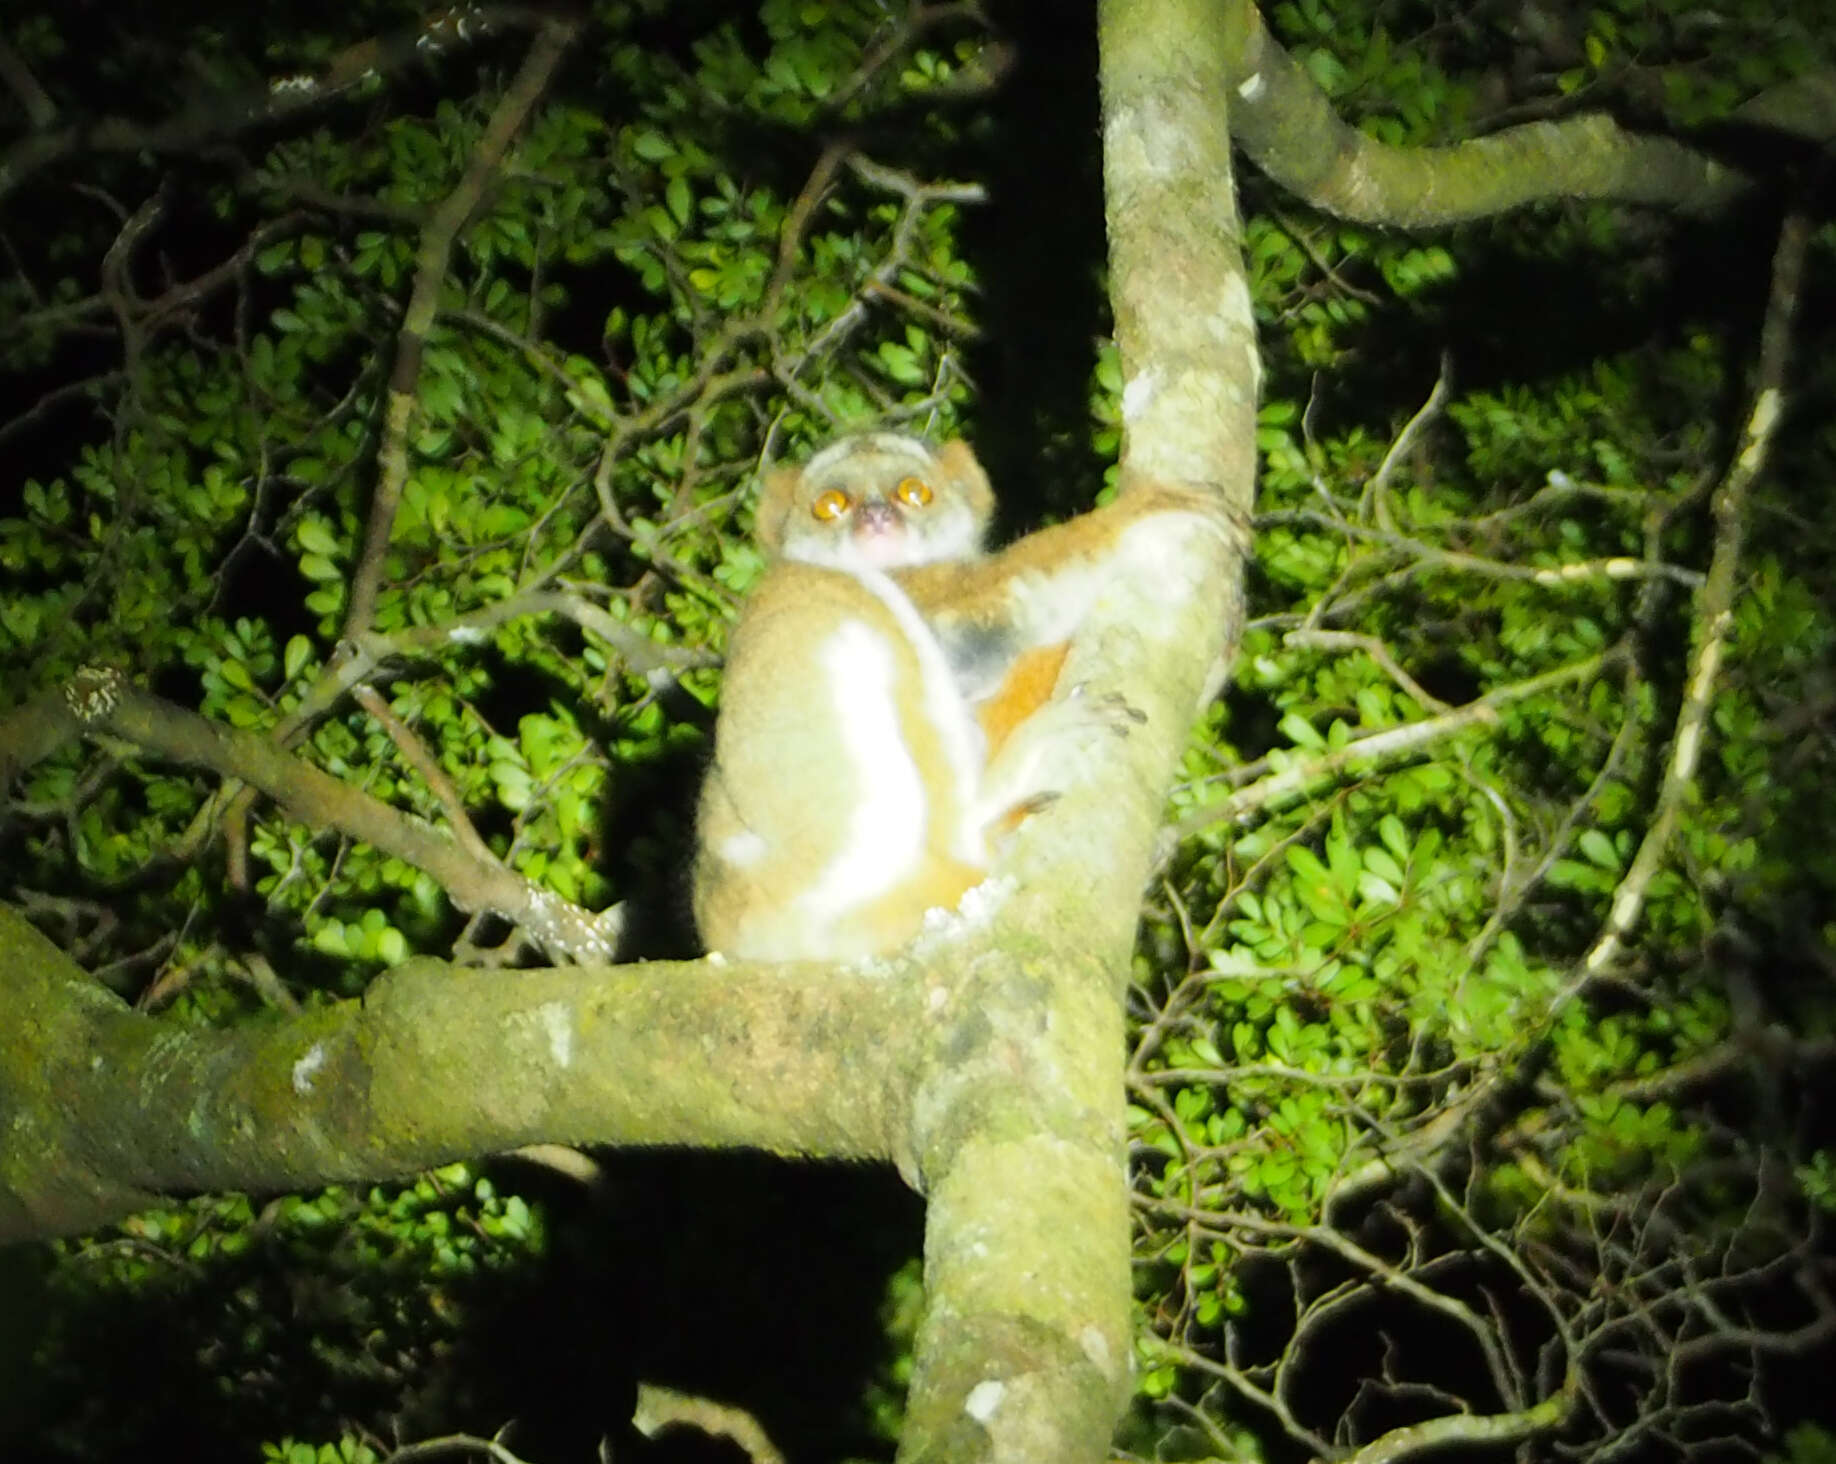 Image of Southern Woolly Lemur